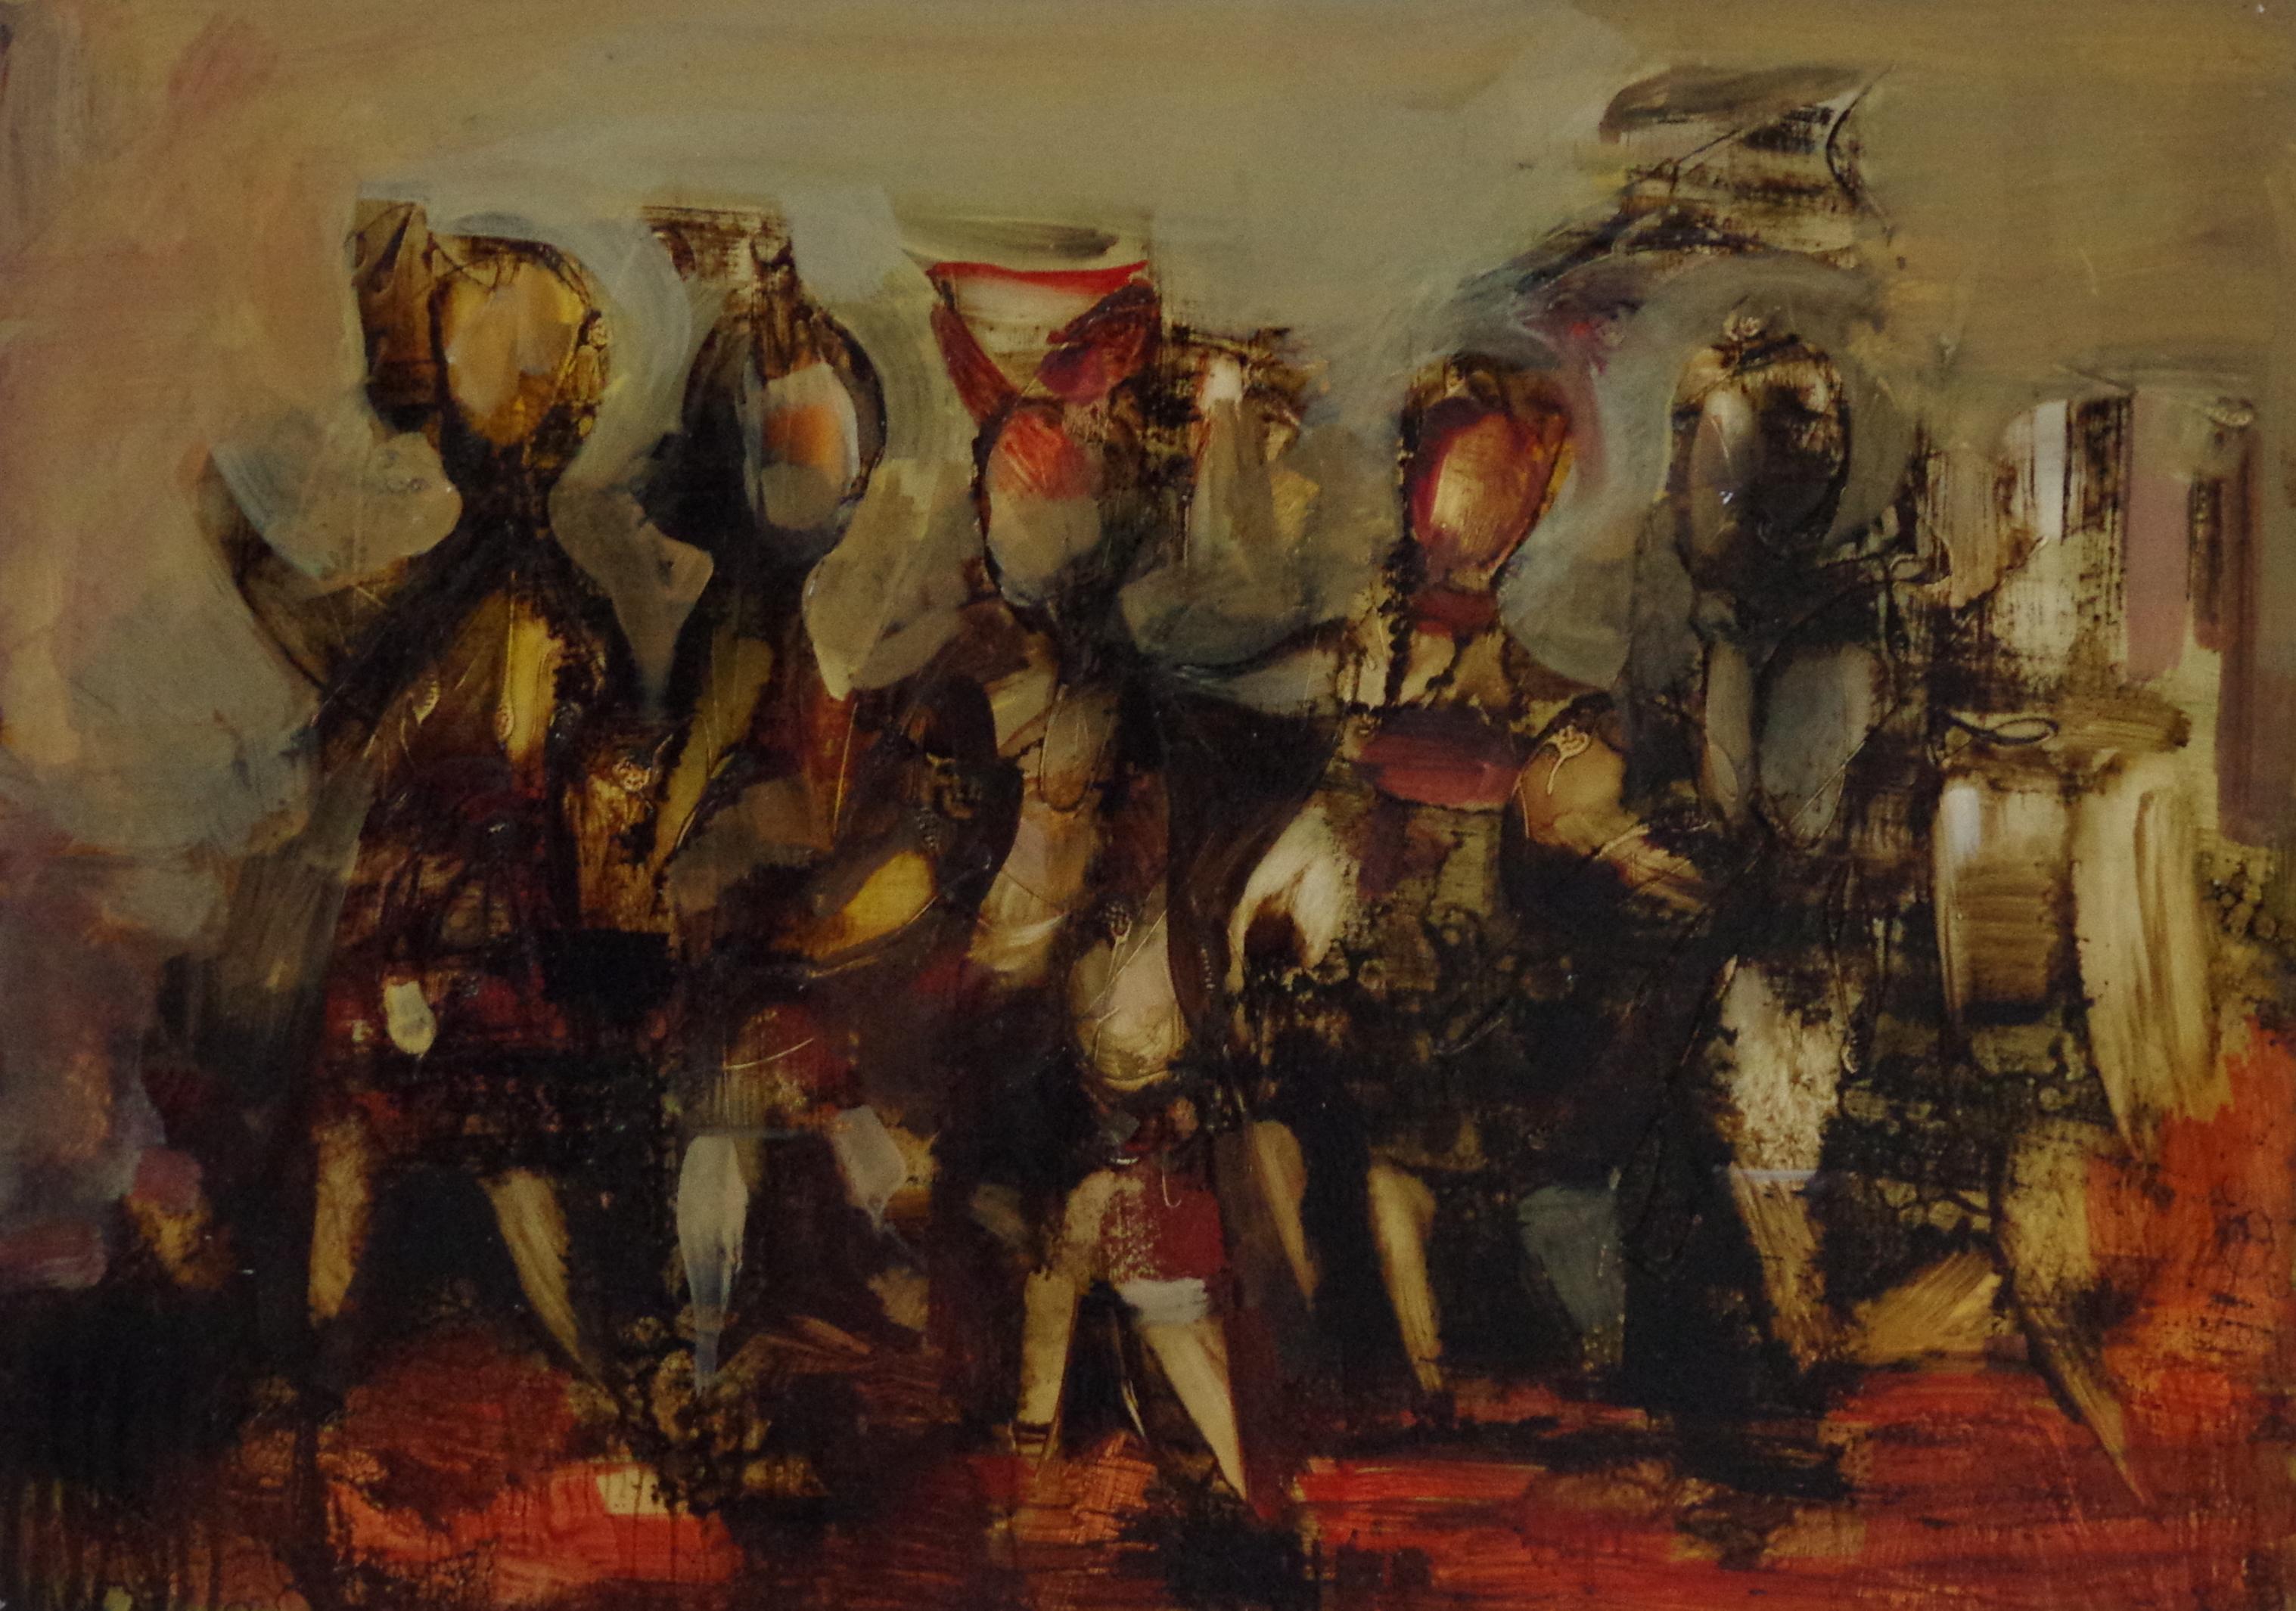 Figures from Theatre, Original Oil Painting